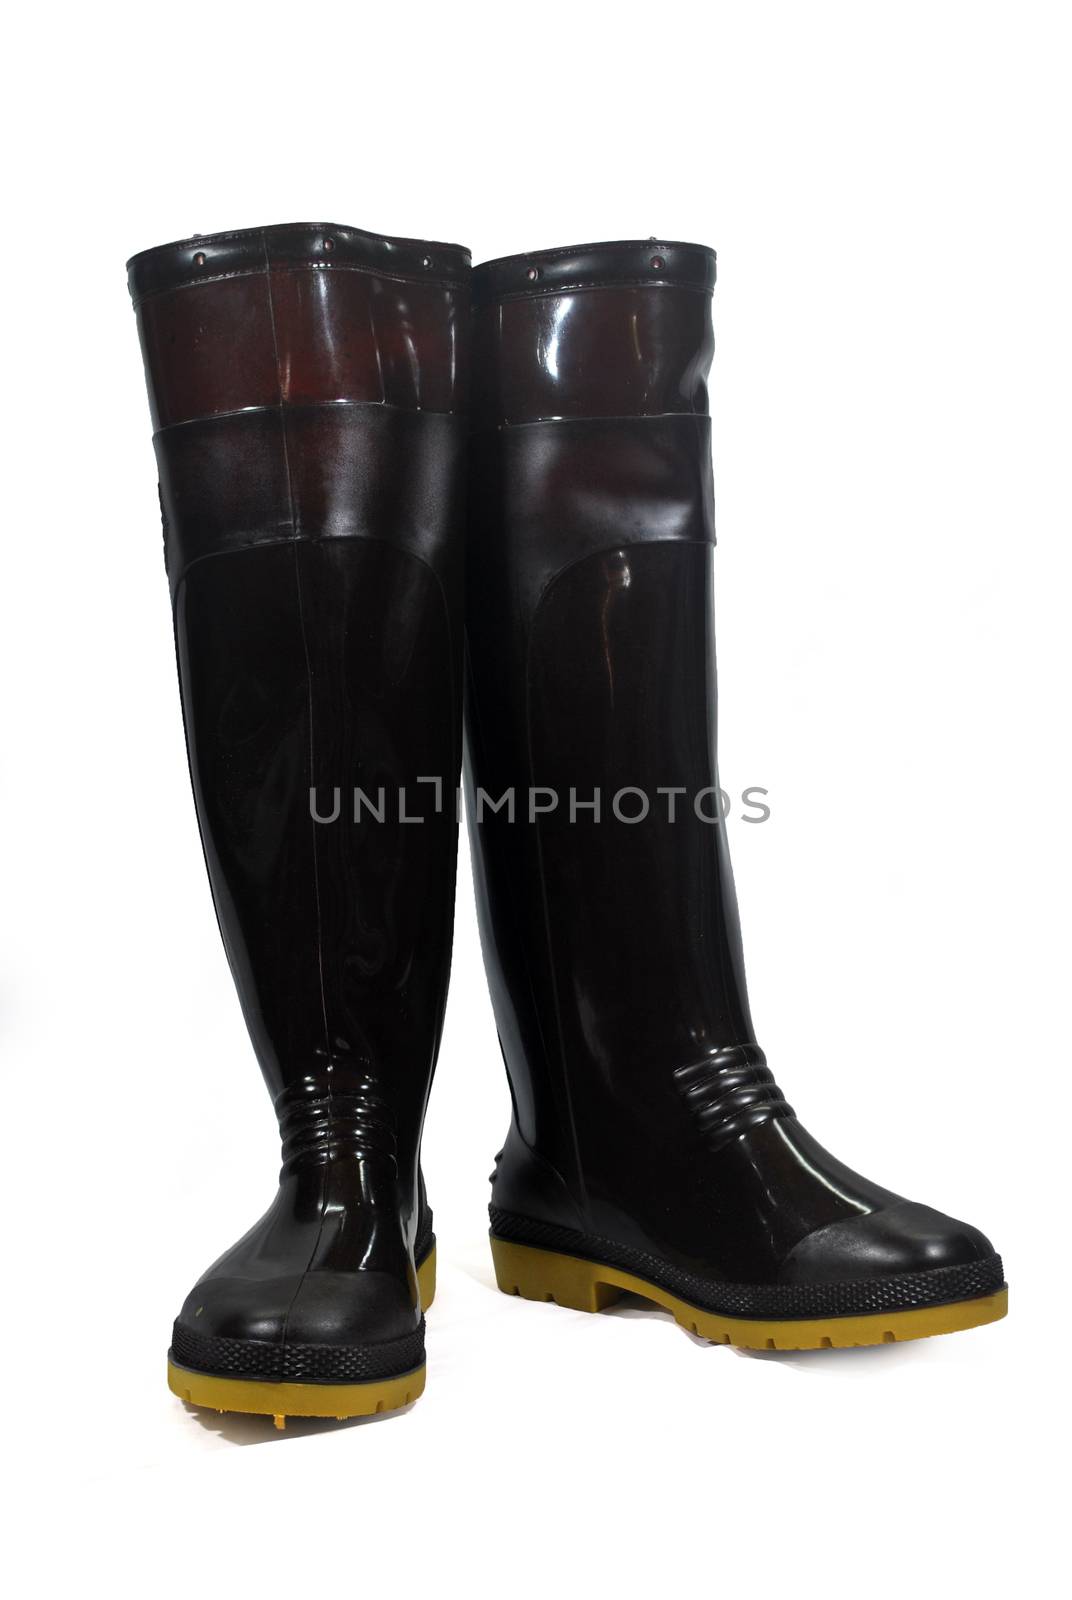 Brown waterproof rubber boots isolated on white background.(with Clipping Path).